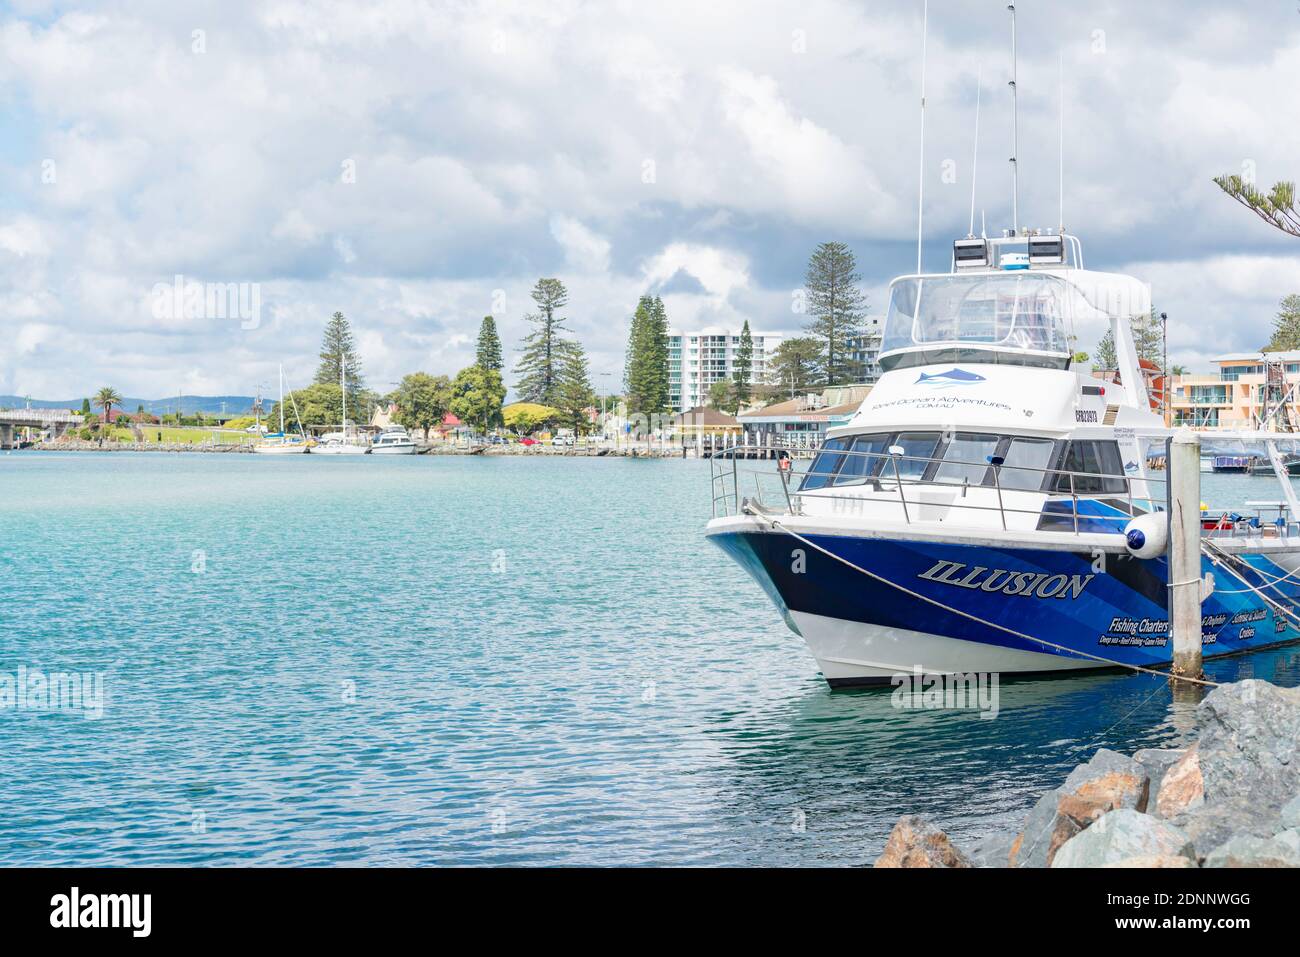 A fishing charter hire boat moored in the harbour at Forster Tuncurry, New South Wales, Australia Stock Photo